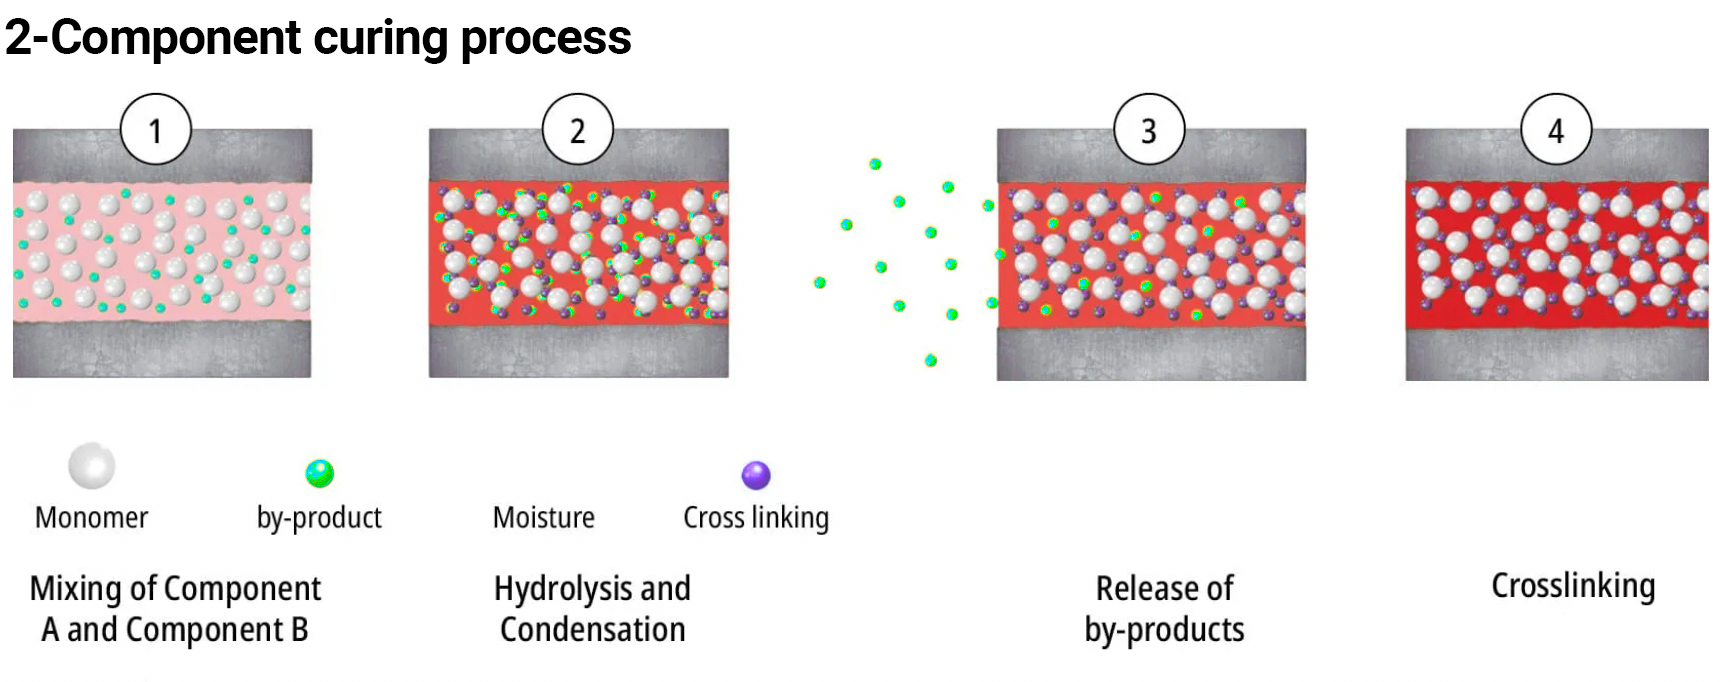 2-component curing process